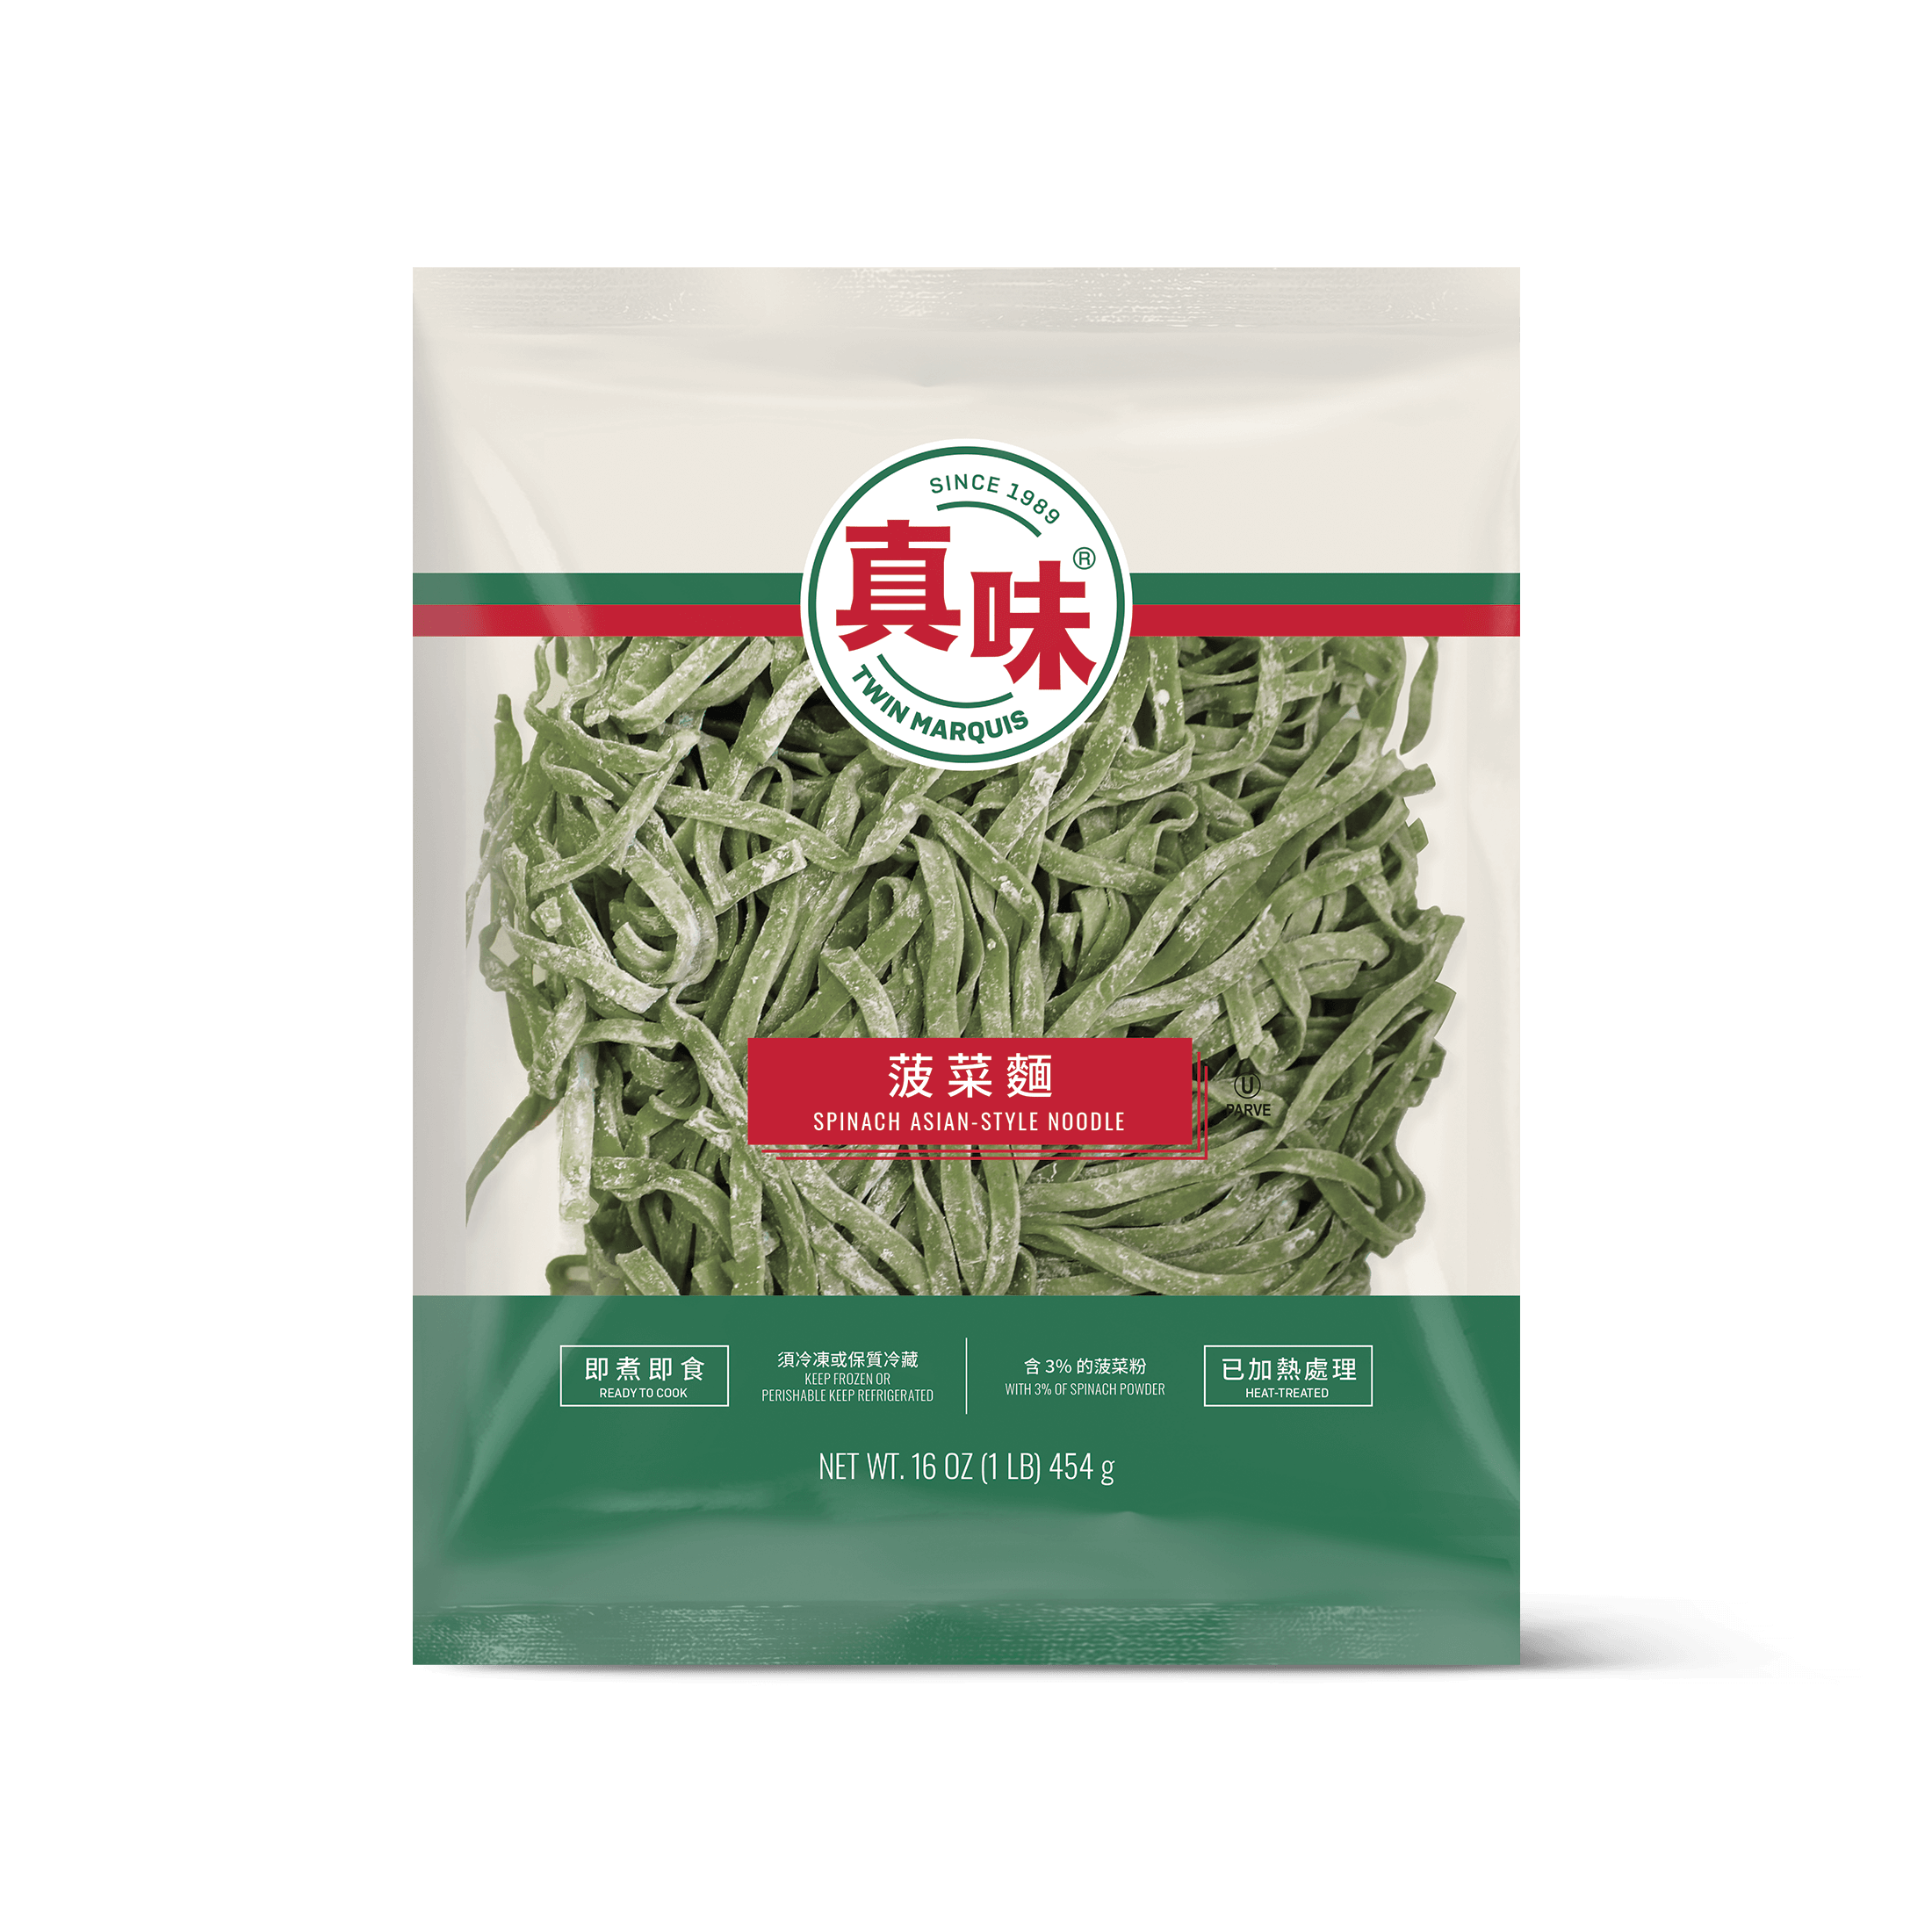 Spinach Asian-Style Noodle